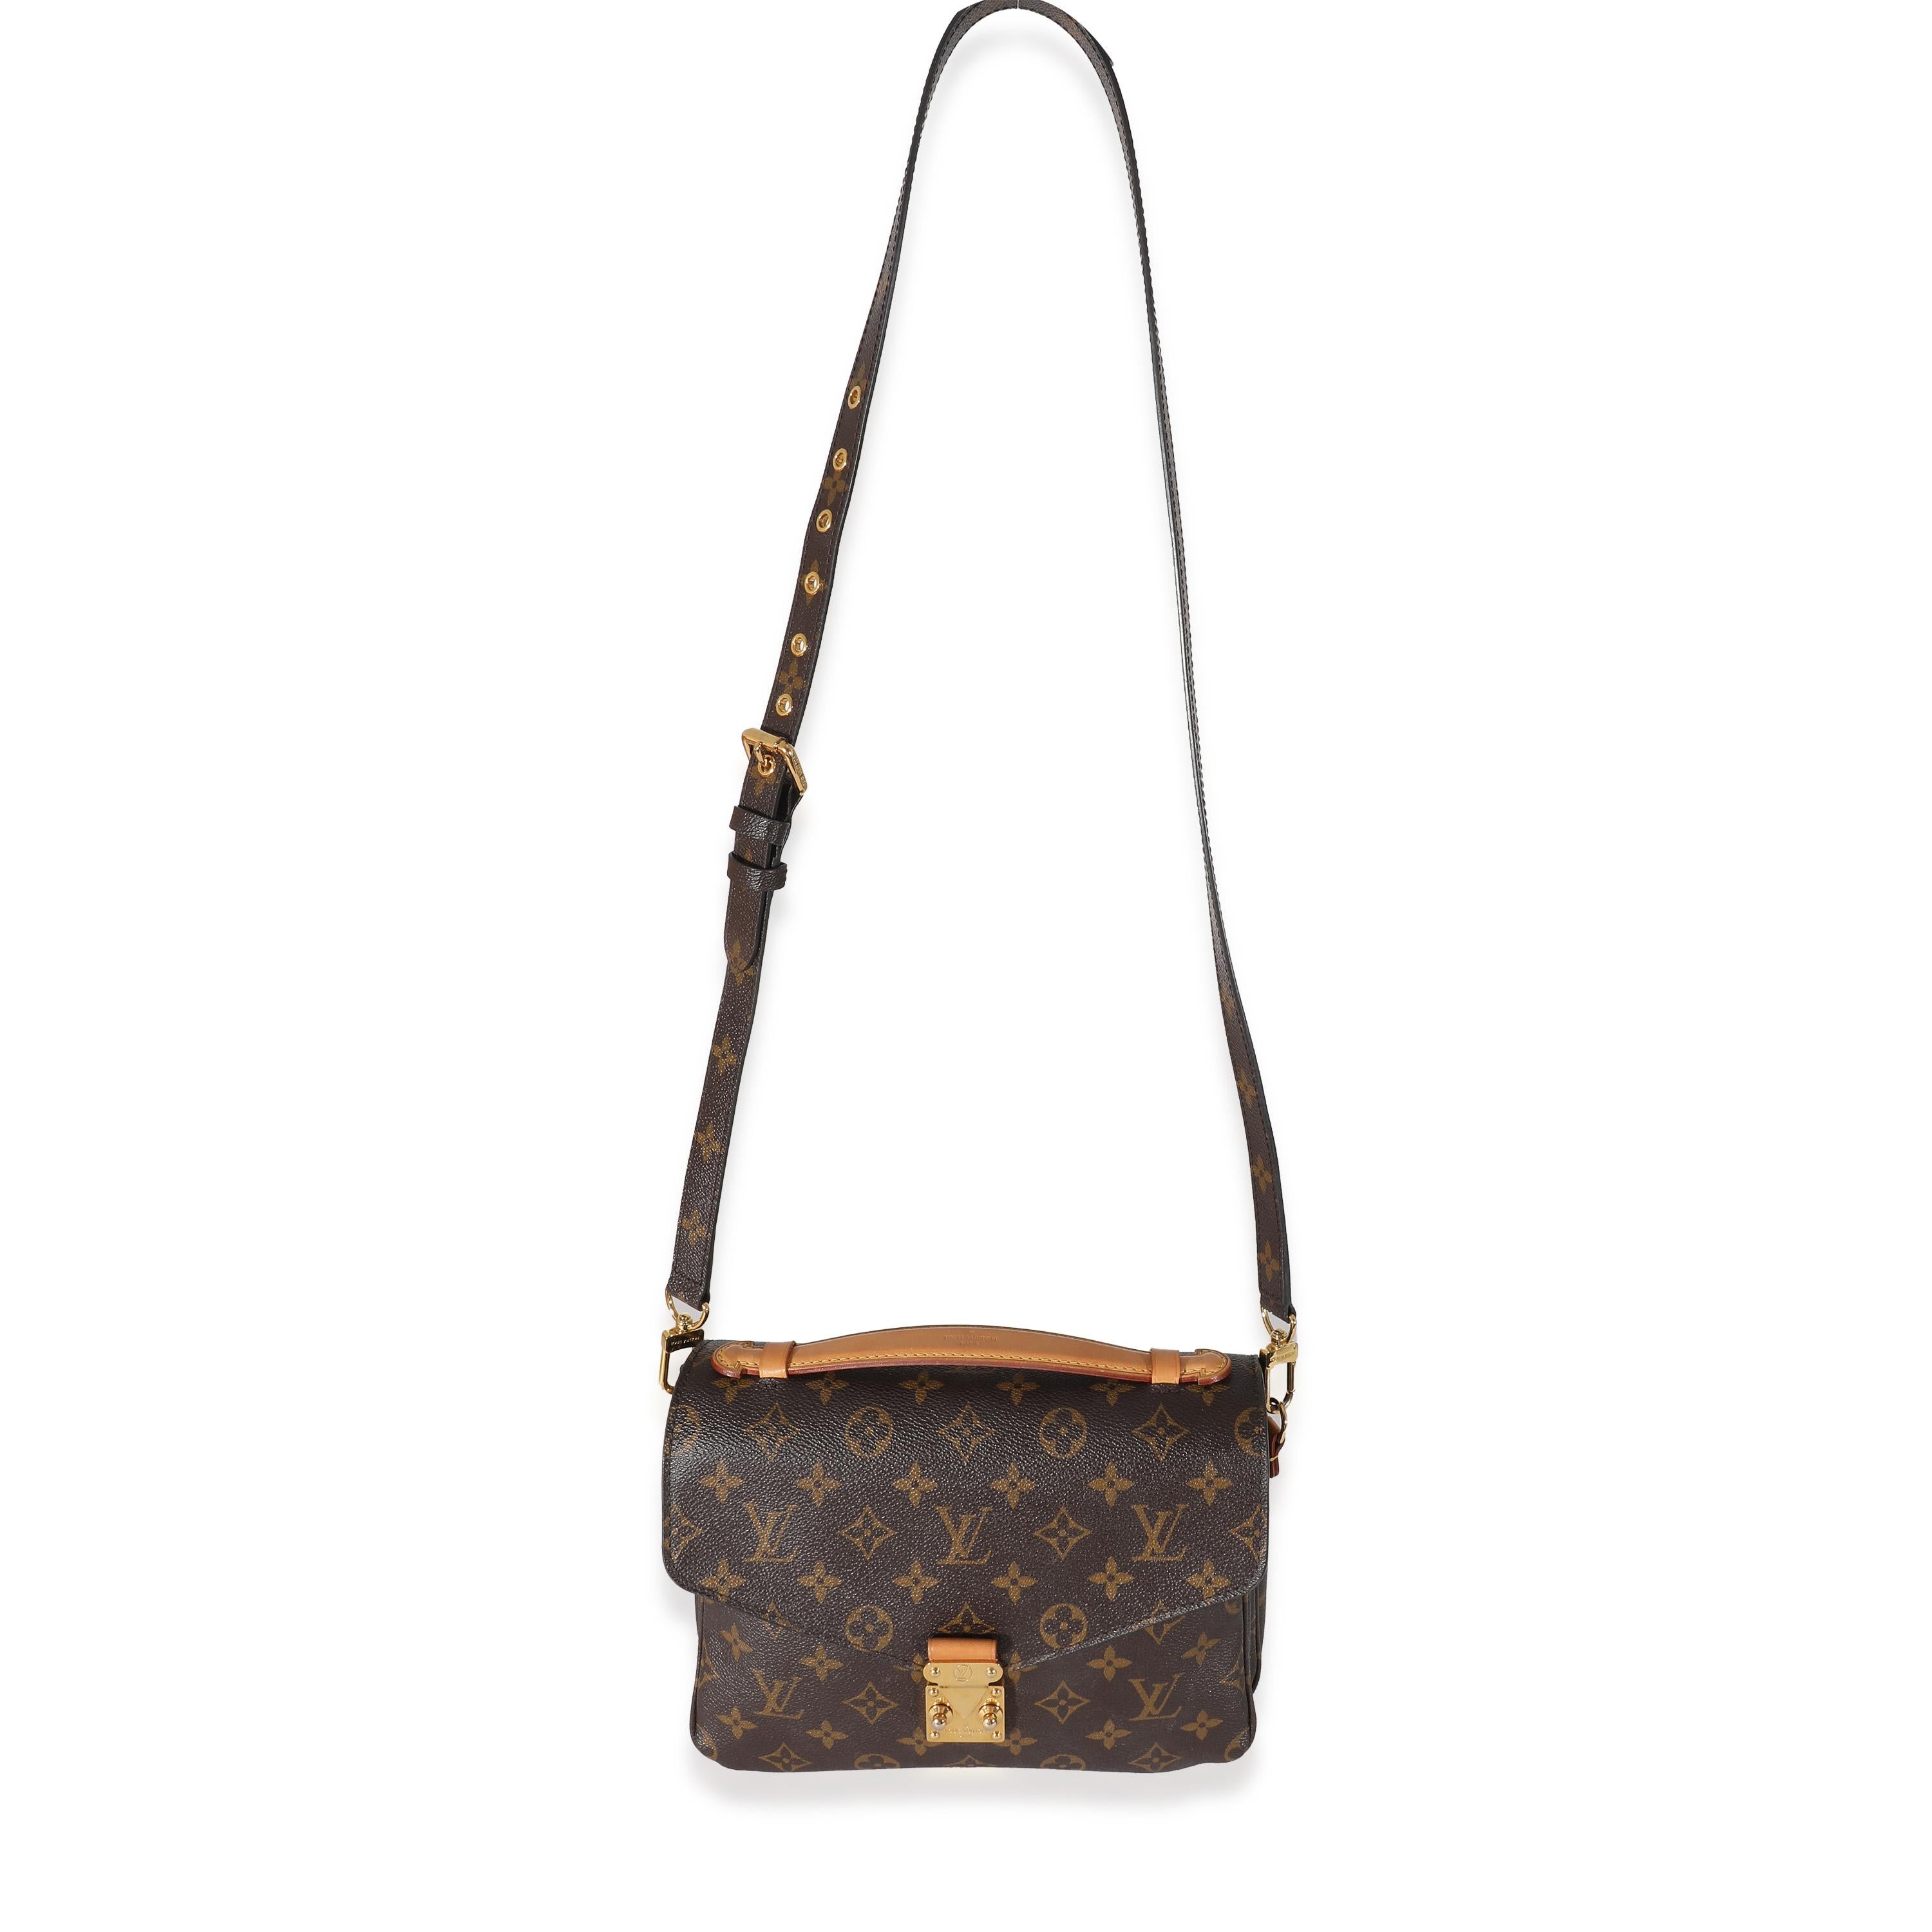 Listing Title: Louis Vuitton Monogram Canvas Pochette Metis
SKU: 134016
MSRP: 2570.00 USD
Condition: Pre-owned 
Handbag Condition: Very Good
Condition Comments: Item is in very good condition with minor signs of wear. Exterior scuffing along lining.